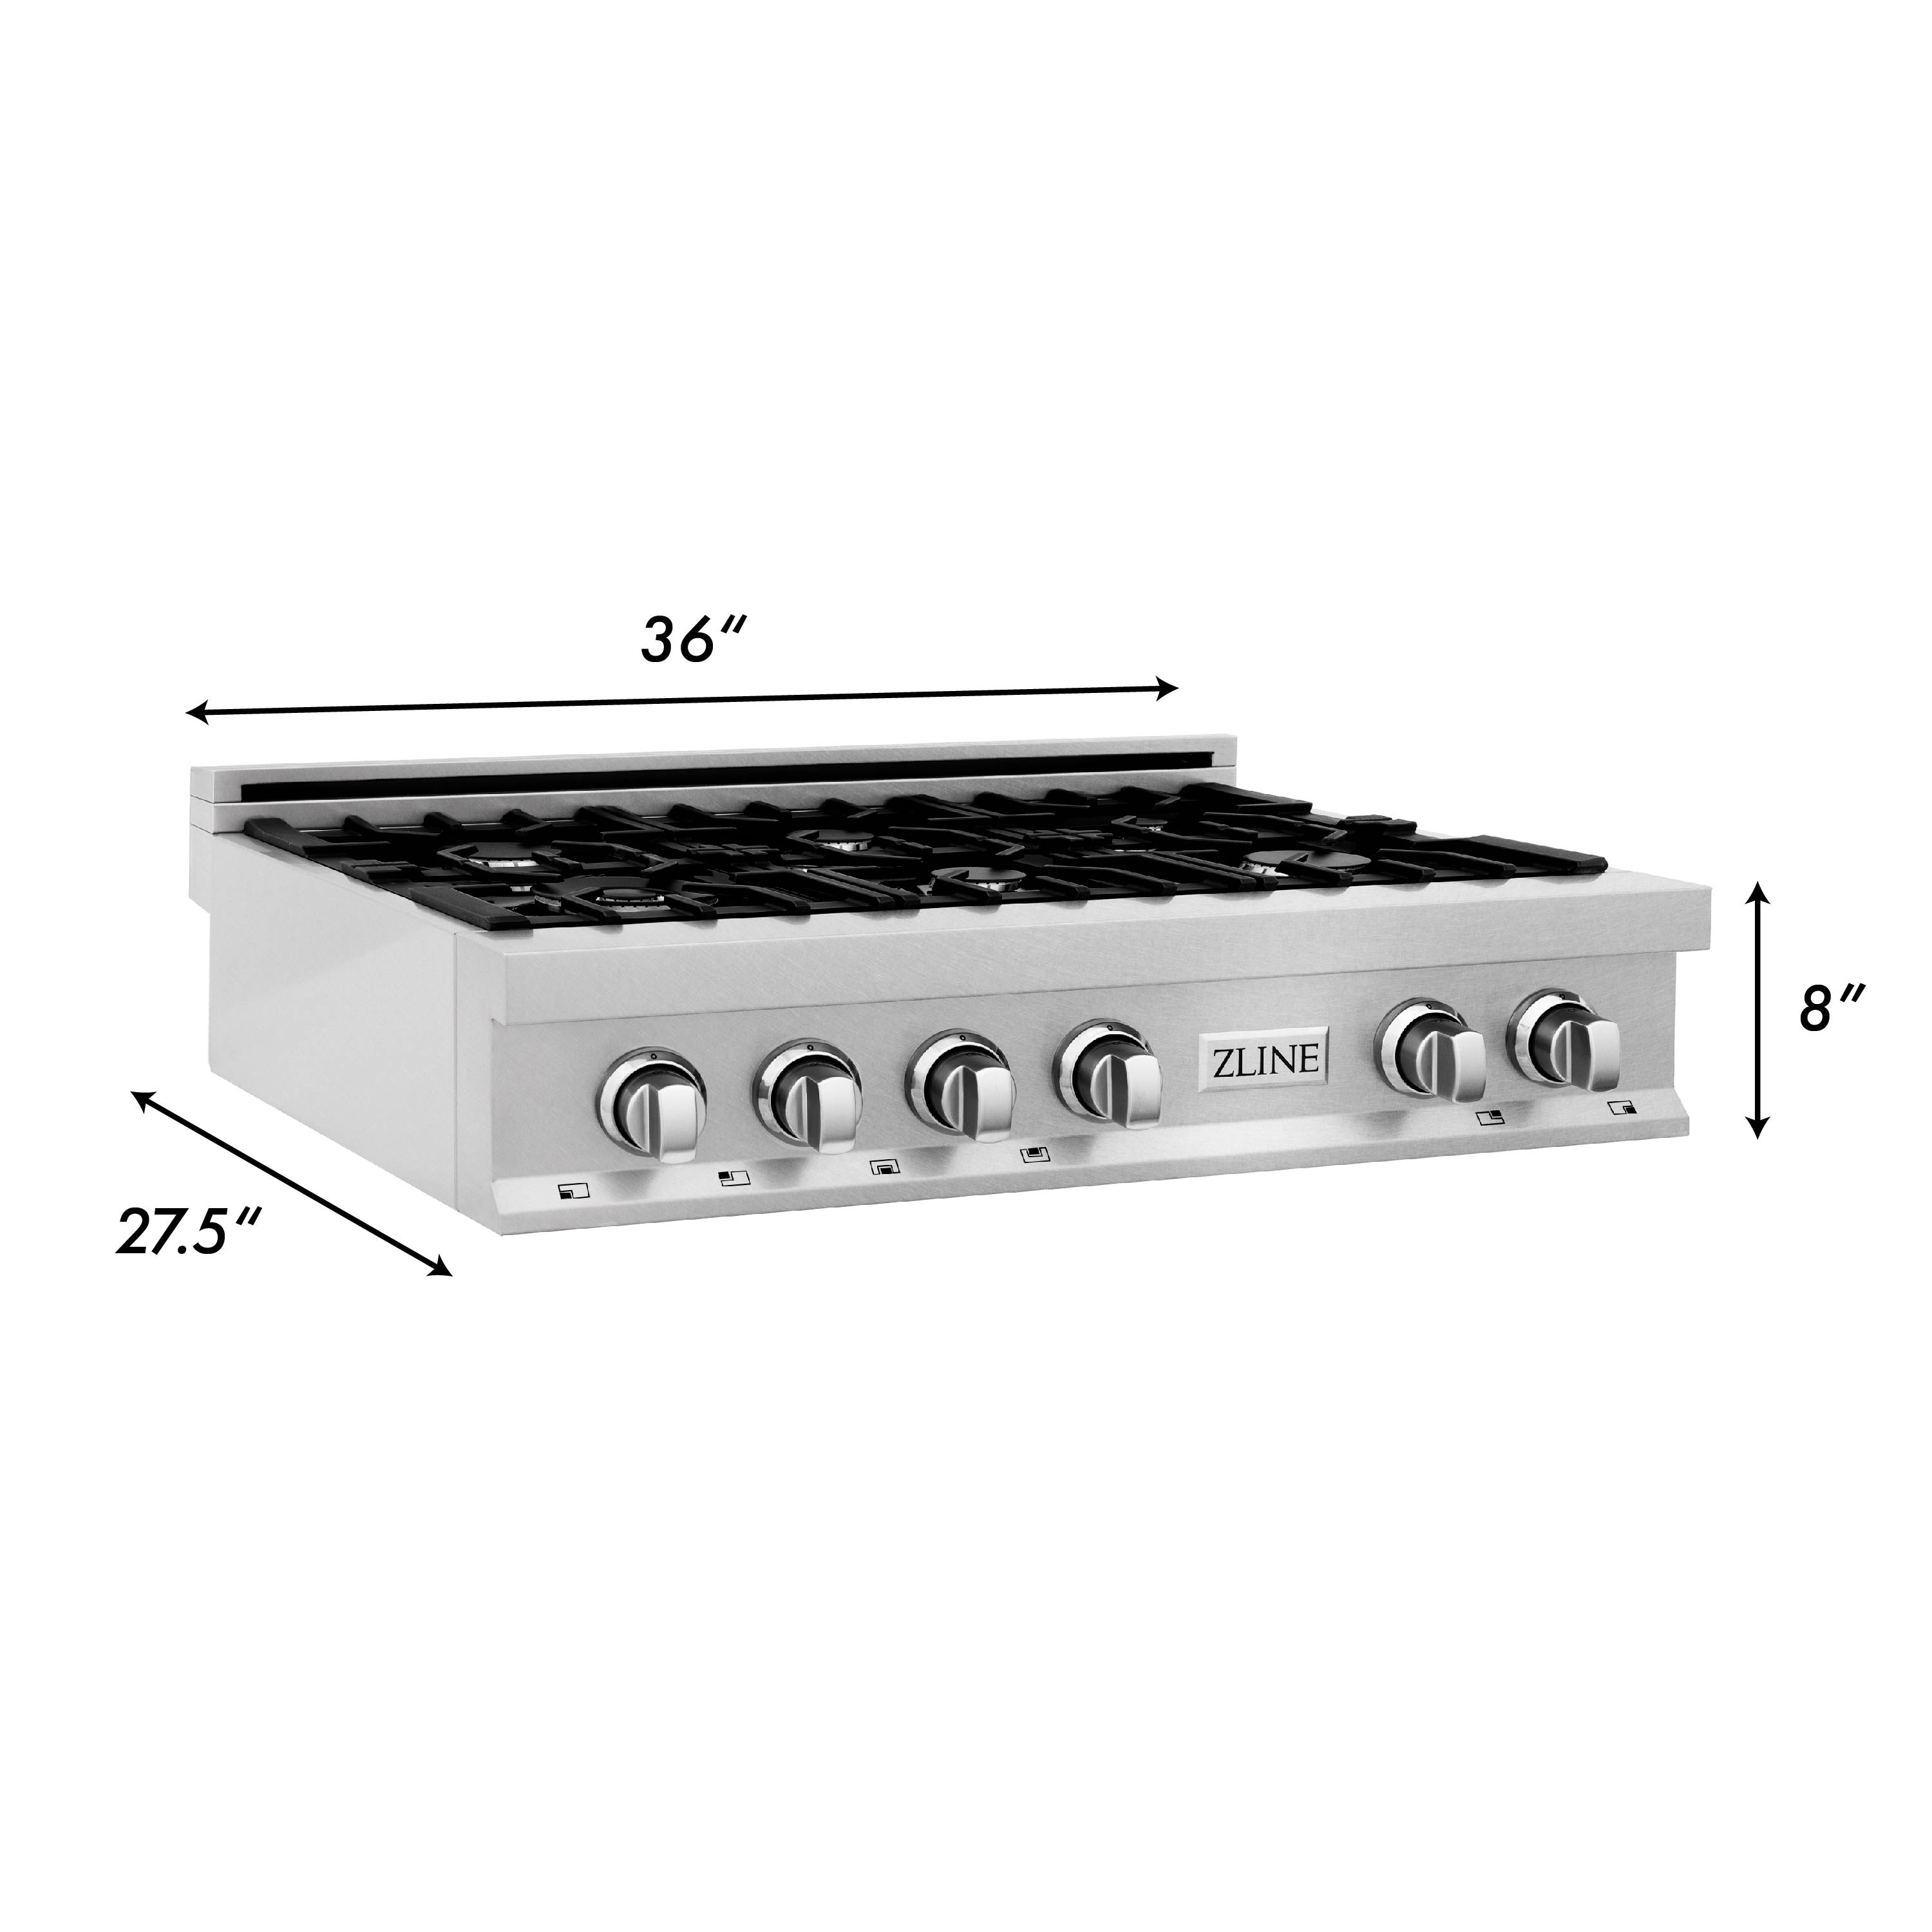 ZLINE 30" Porcelain Gas Stovetop in Fingerprint Resistant Stainless Steel with 4 Gas Burners (RTS-30)